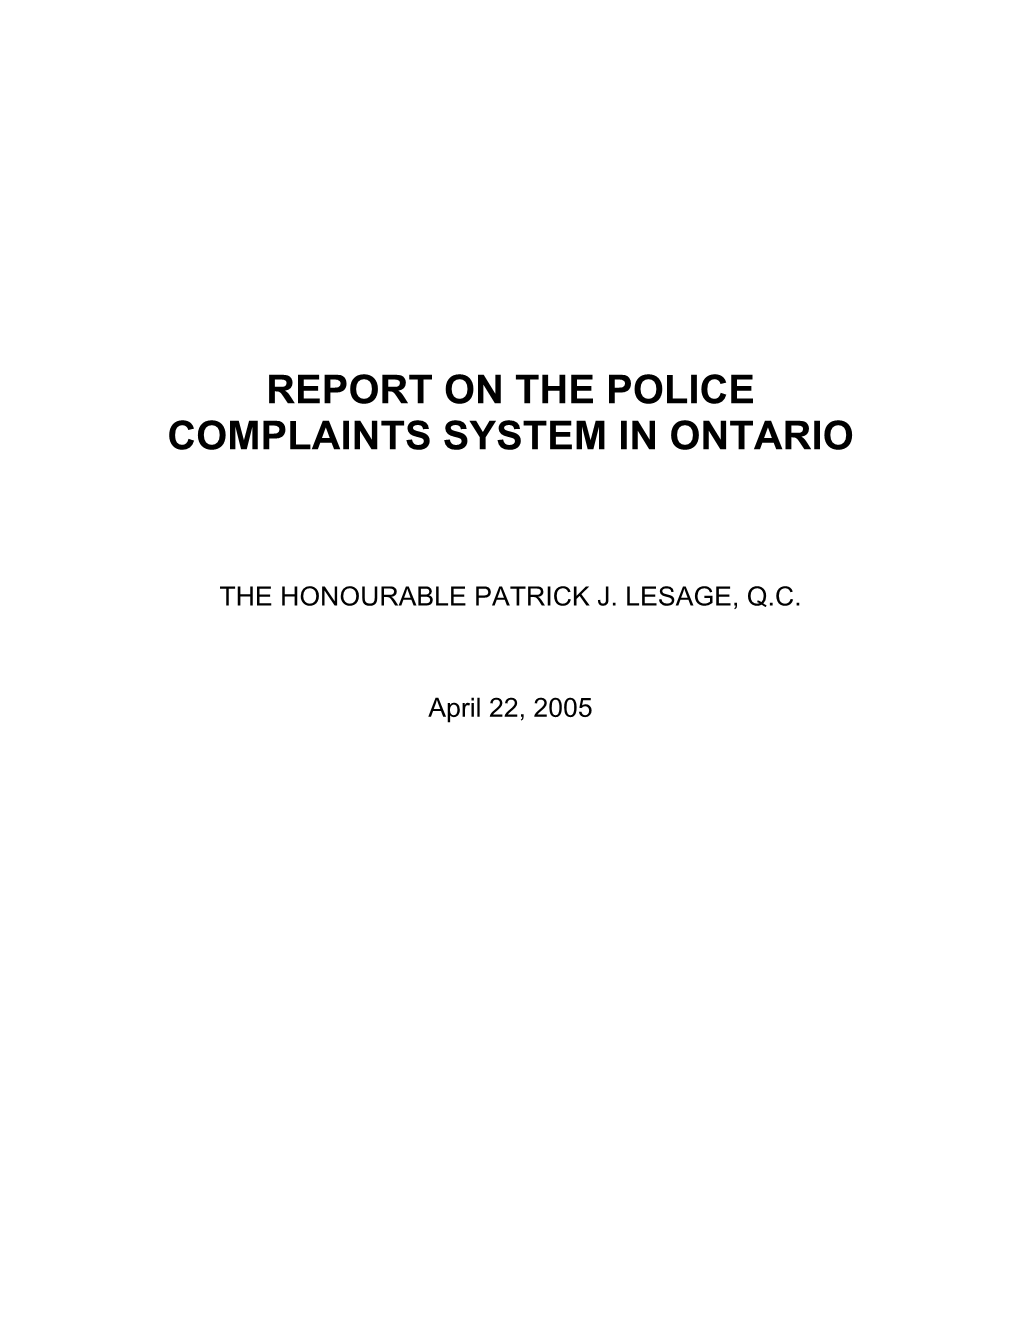 Report on the Police Complaints System in Ontario